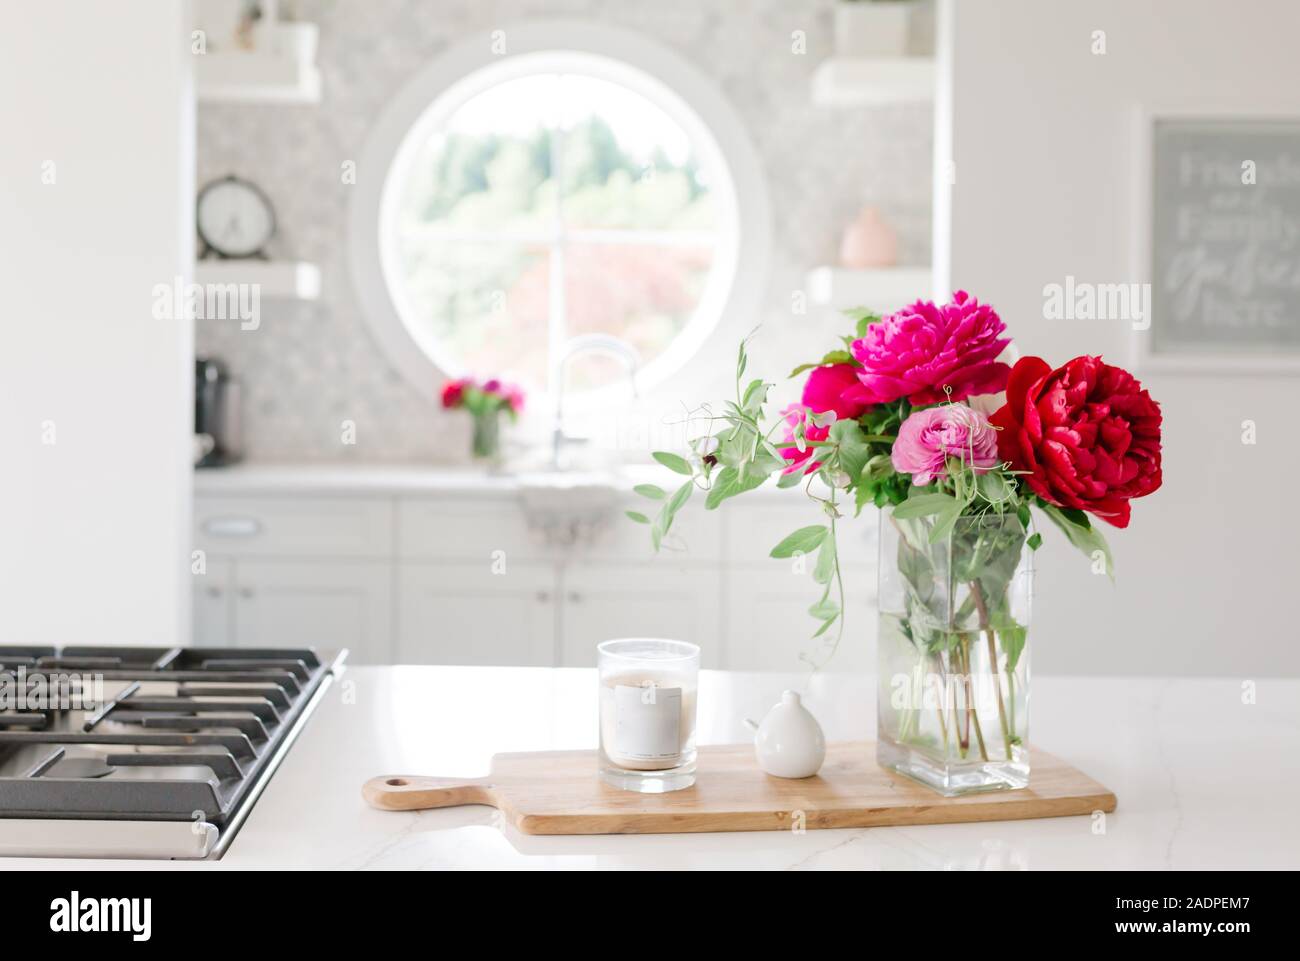 Flowers in a white kitchen  with candle Stock Photo